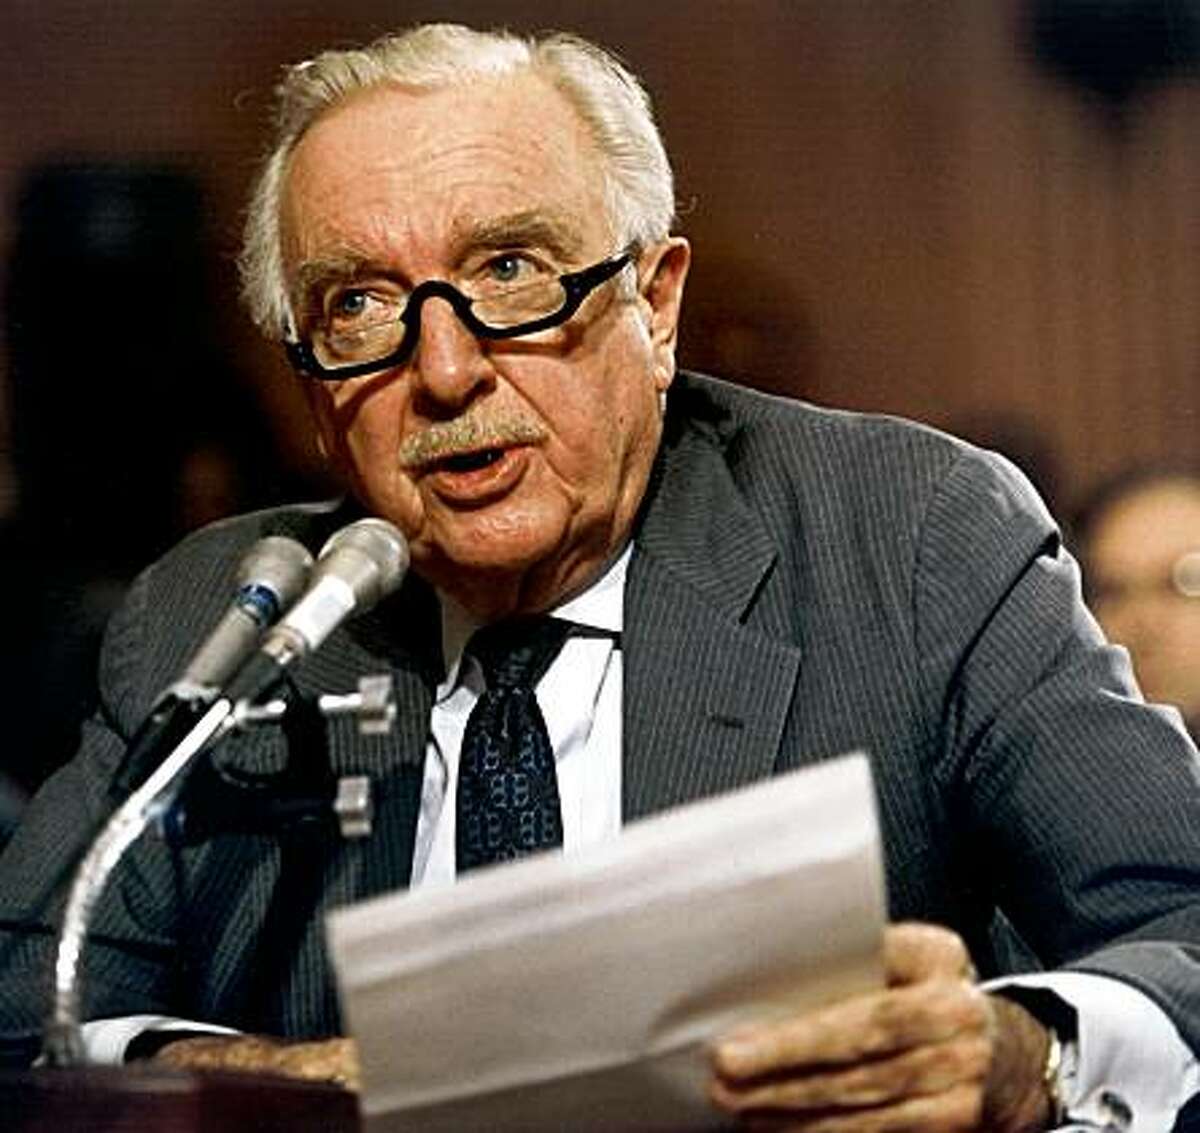 This February 20, 1991 file photograph shows former CBS anchor Walter Cronkite testifying before the US Senate Committee in Washington, DC, on Governmental Affairs concerning the Pentagon rules on media access to the Persian Gulf War.